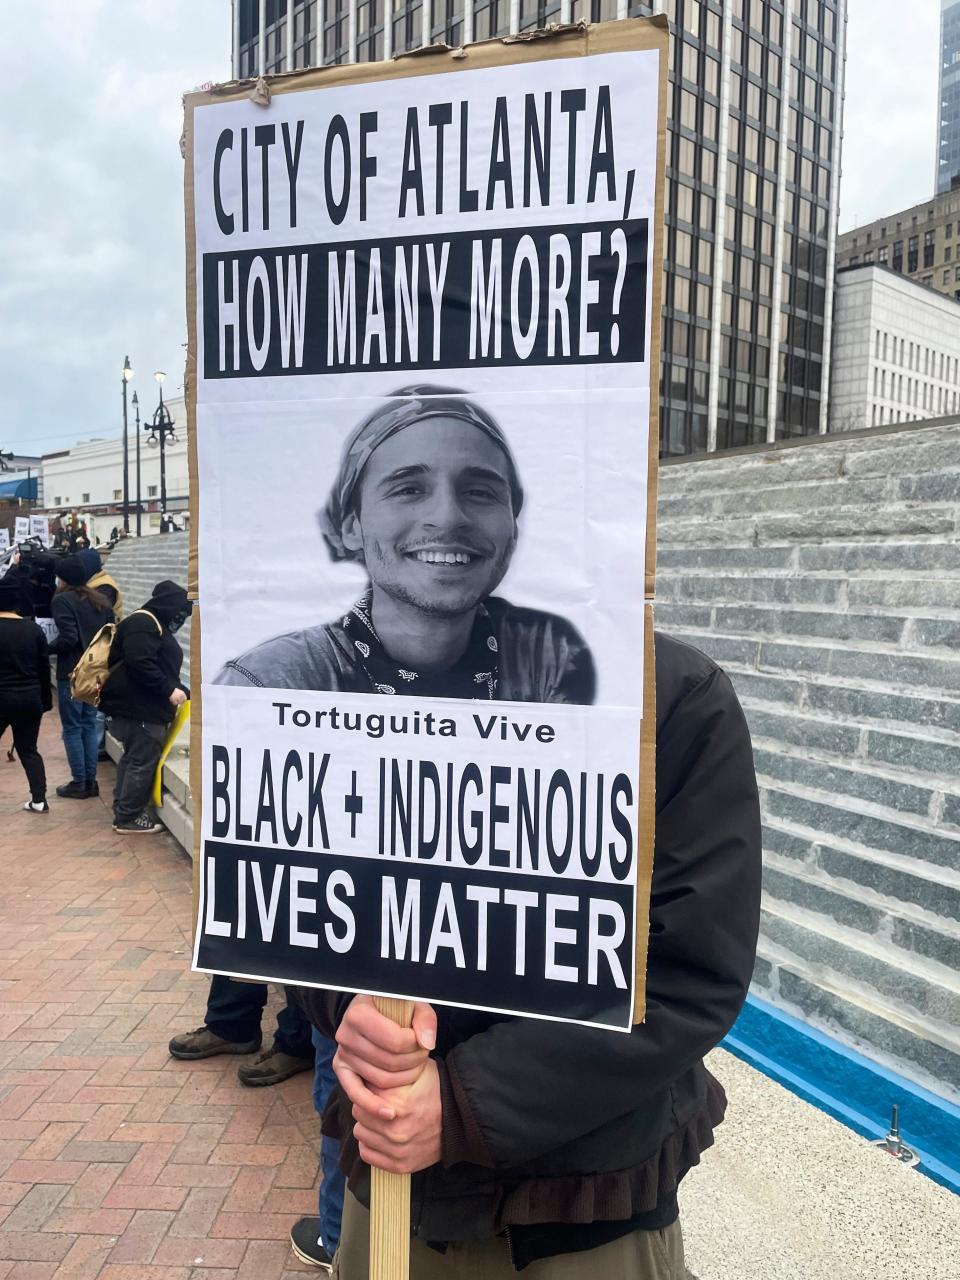 A demonstrator holds a sign protesting the death of an environmental activist known as Tortuguita in Atlanta in January 2023. Tortuguita was killed on Jan. 18, 2023, after authorities said the 26-year-old shot a state trooper. Activists questioned officials’ version of events, demanding an independent investigation.